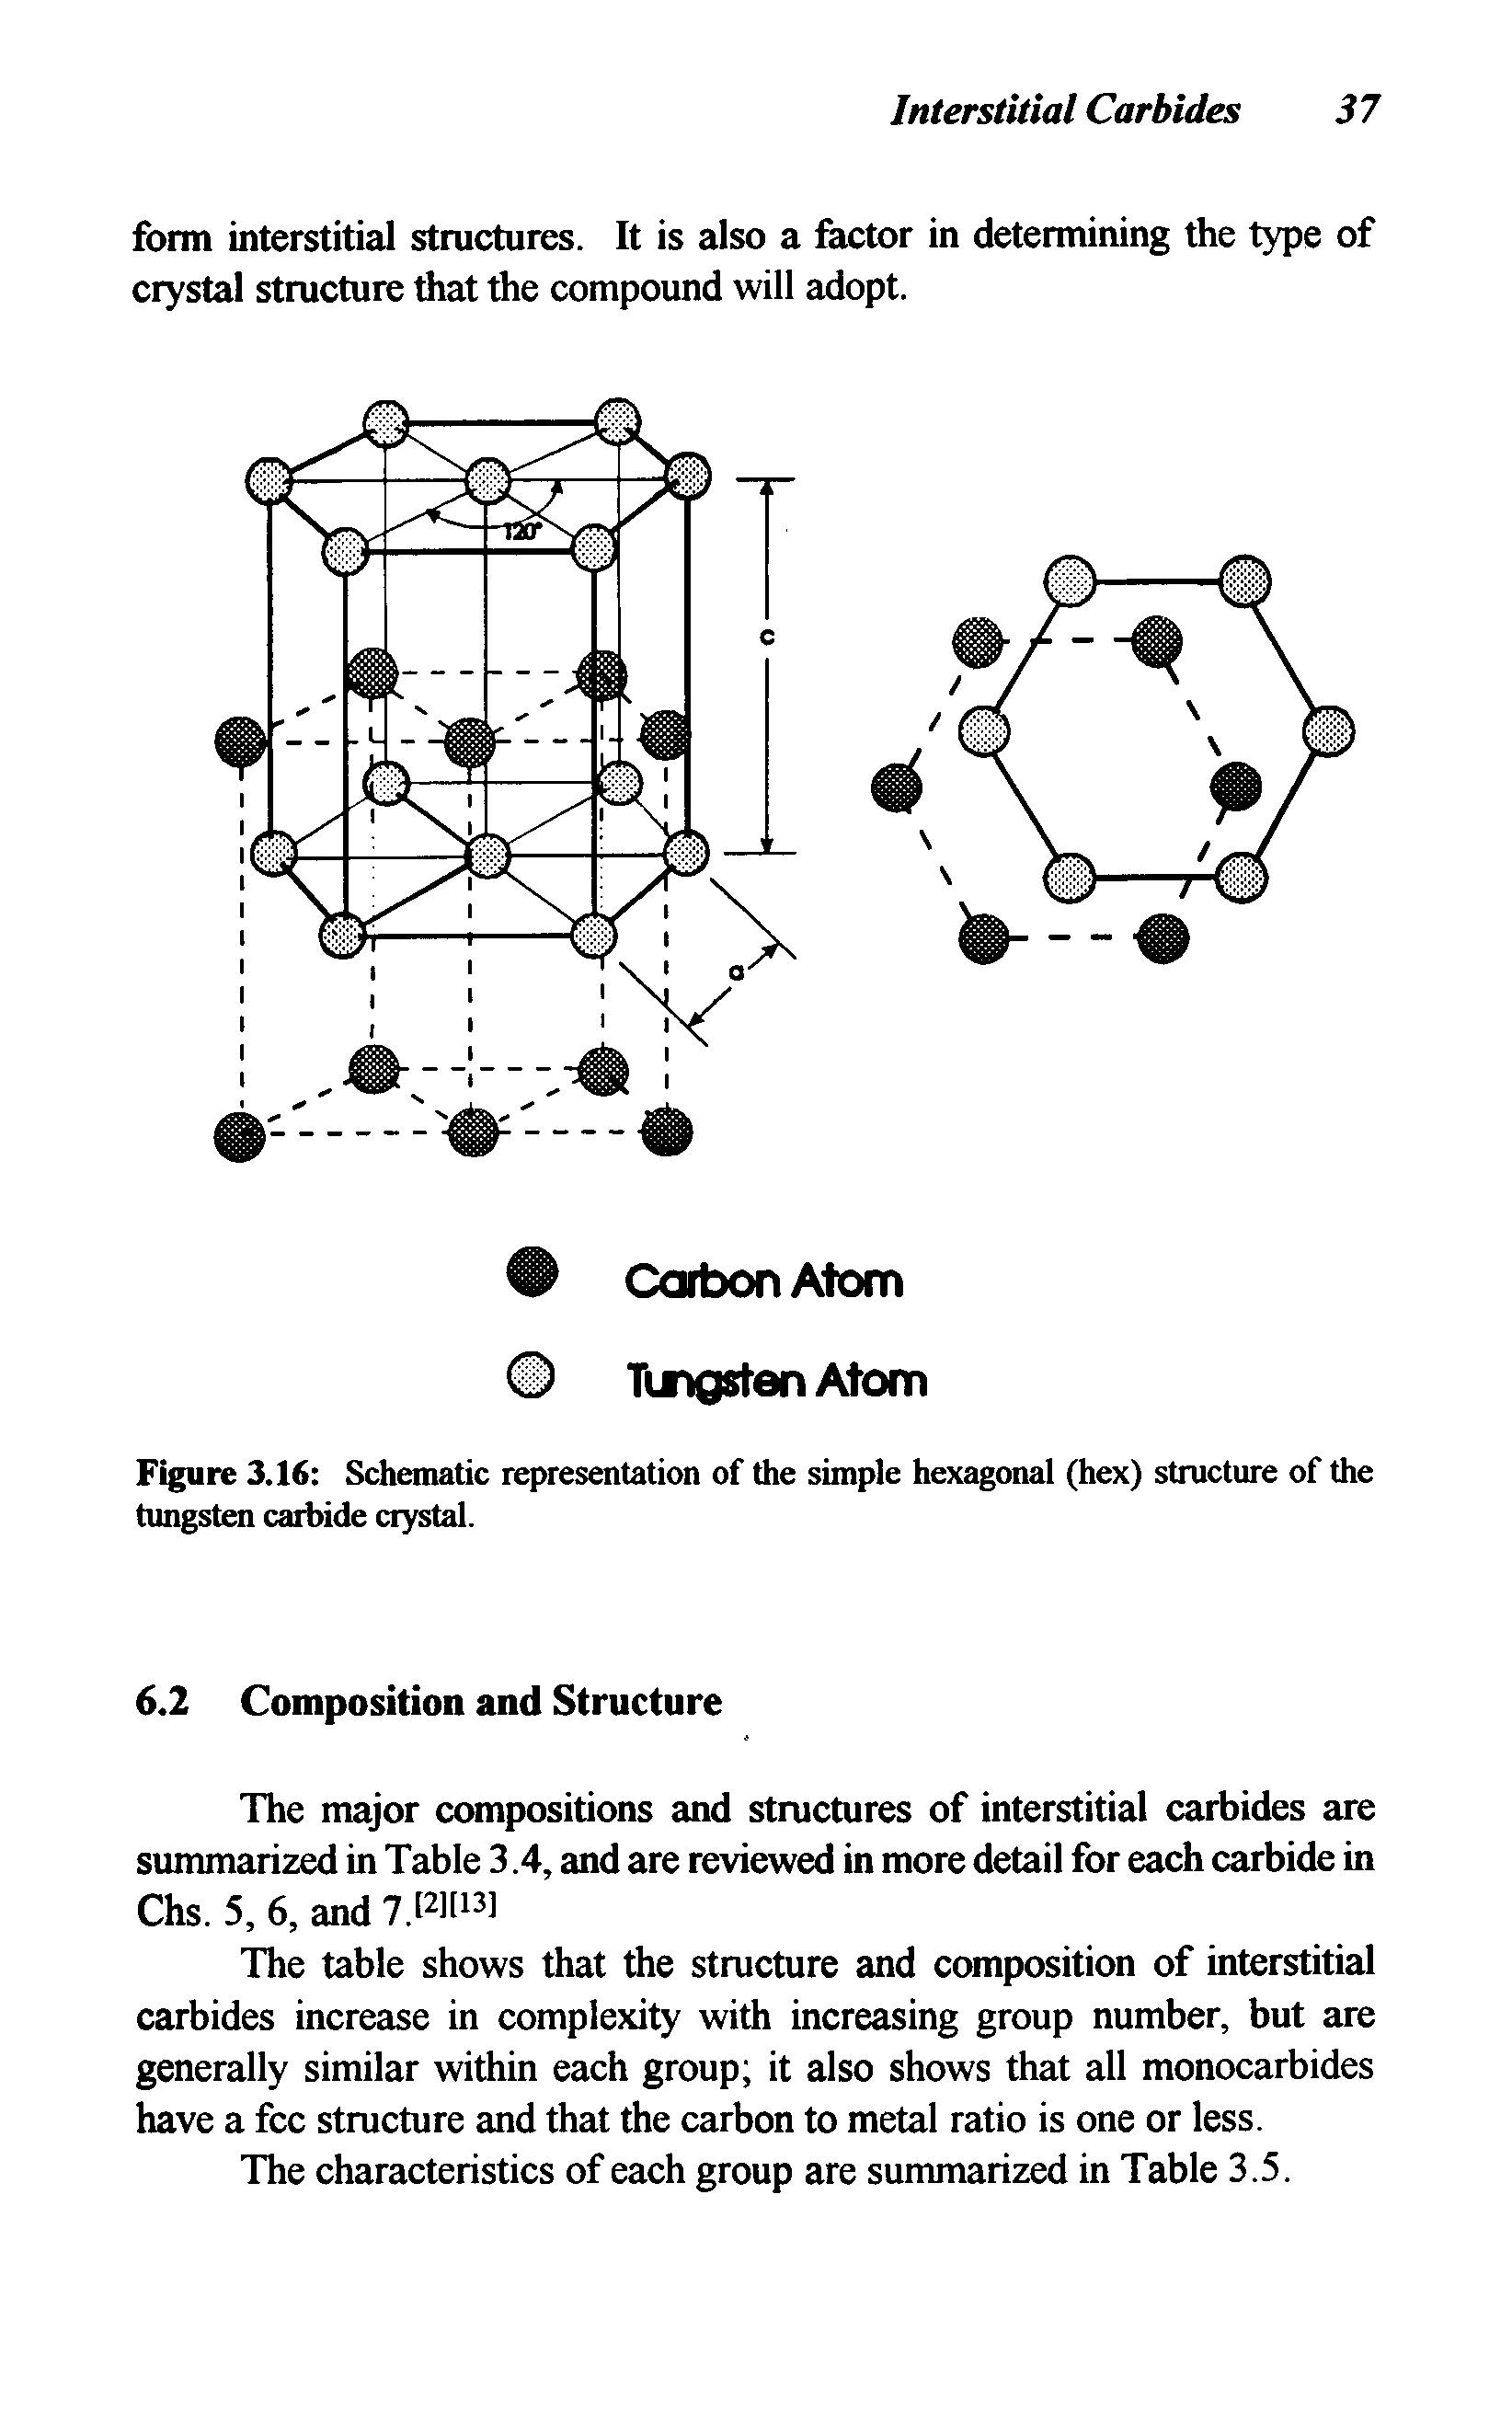 Figure 3.16 Schematic ie M esentation of the simple hexagonal (hex) structure of the tungsten carbide crystal.